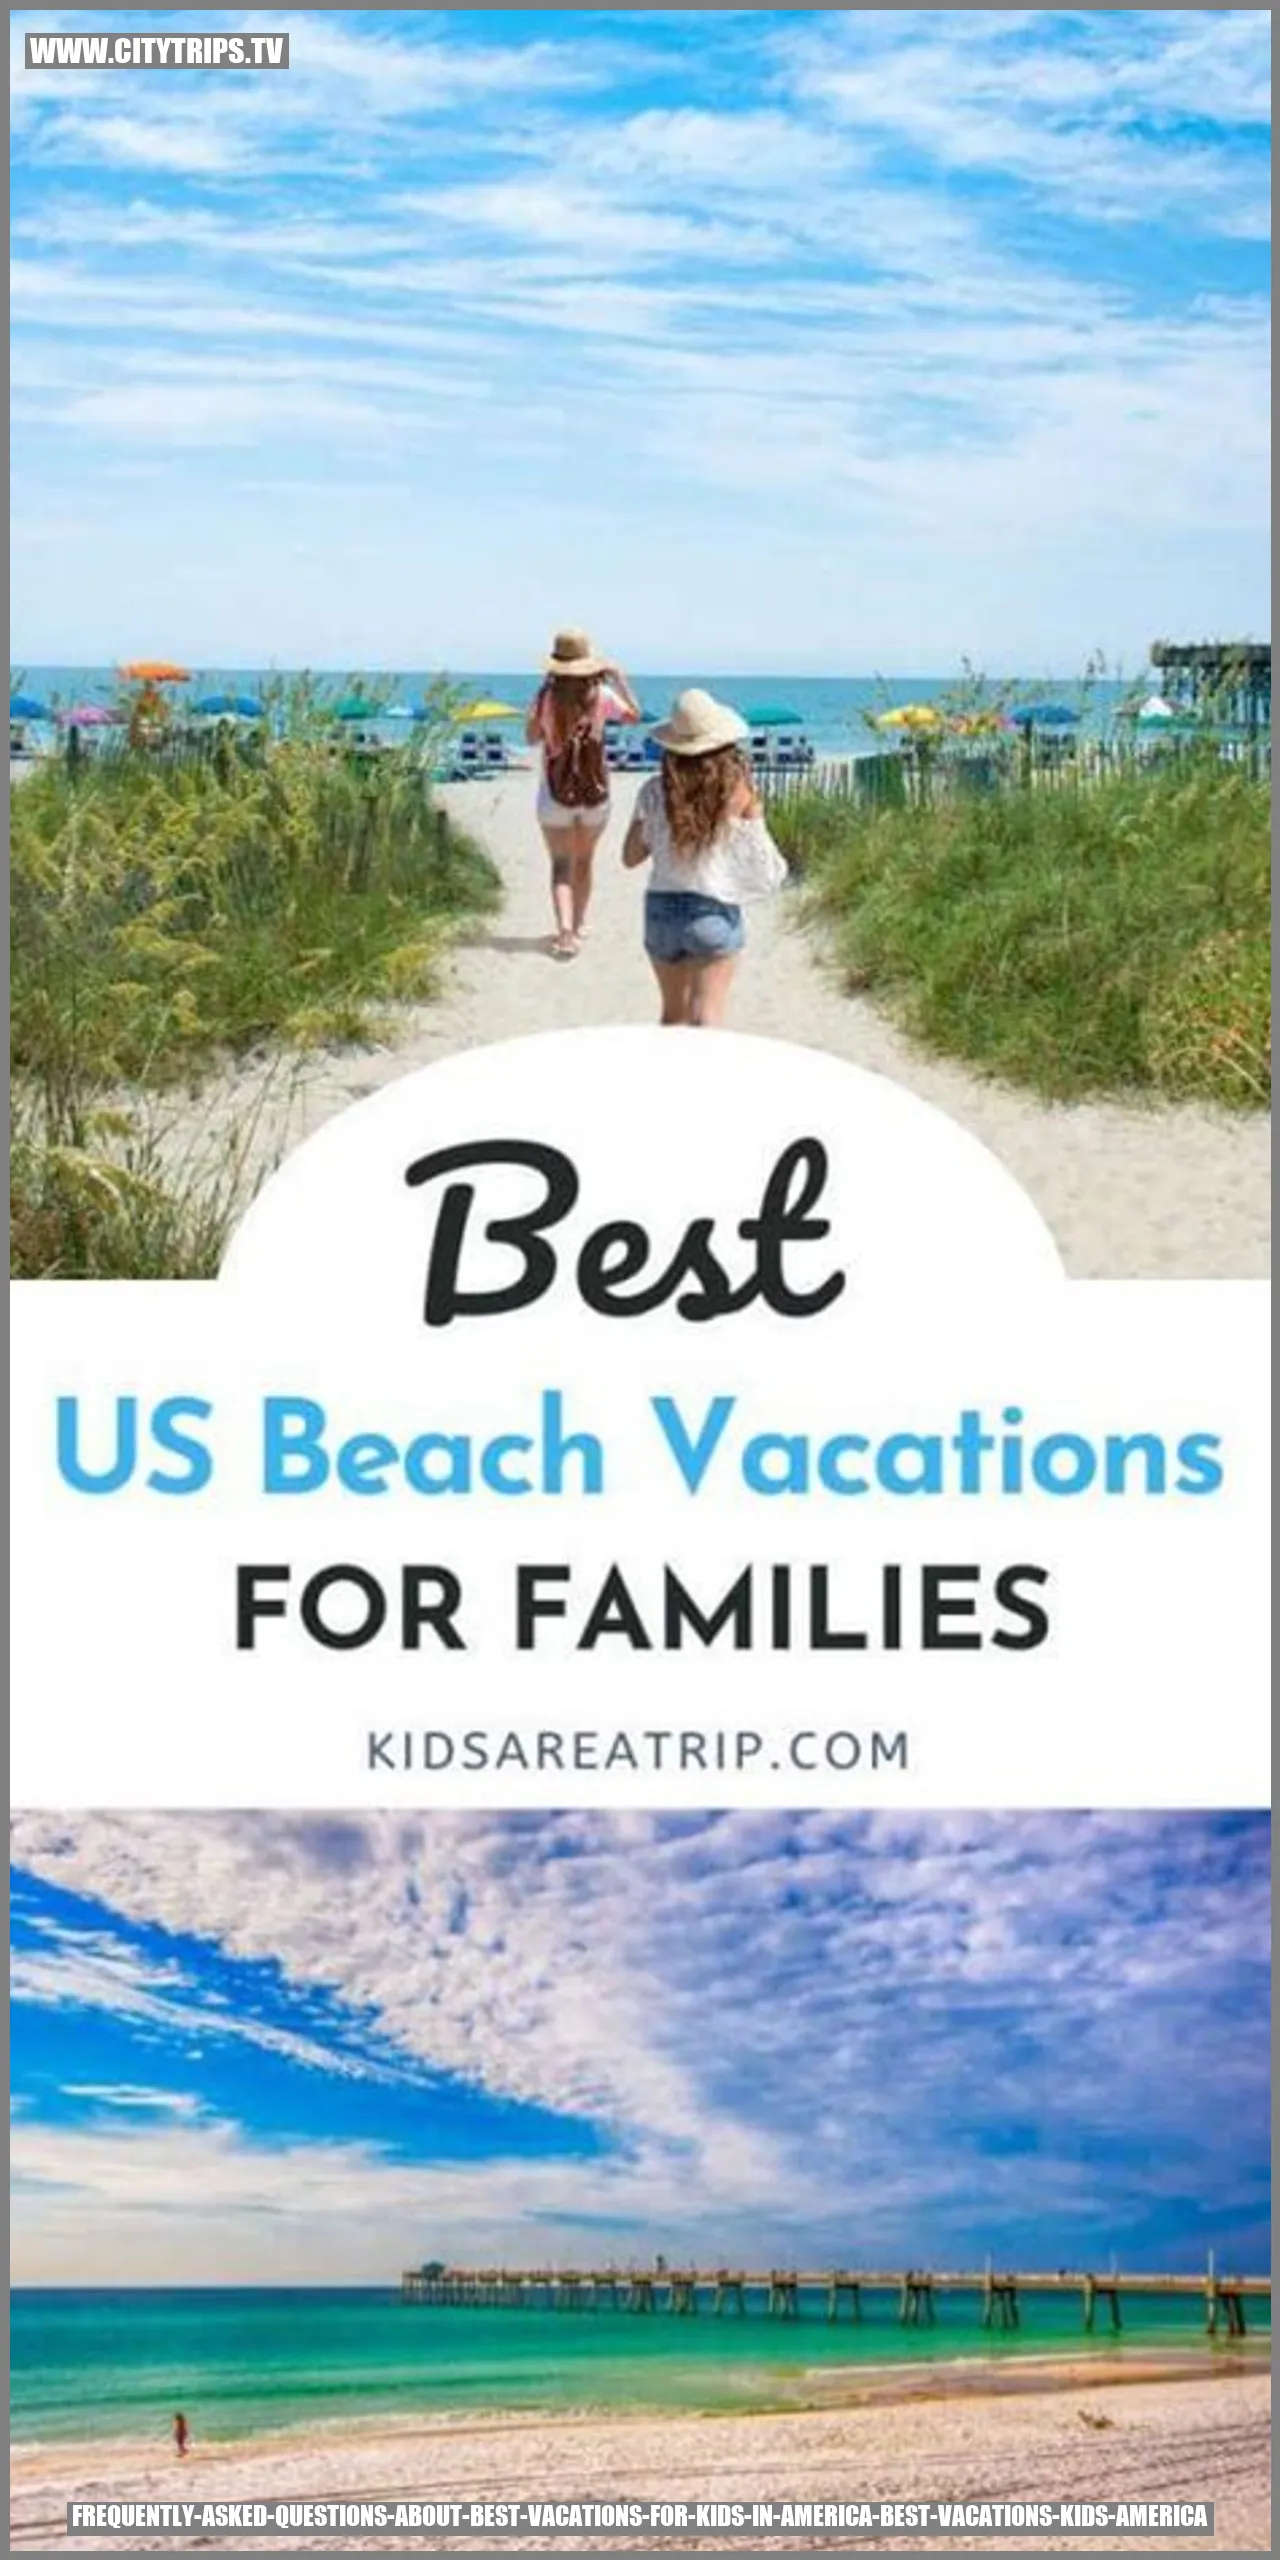 Frequently Asked Questions about Best Vacations for Kids in America